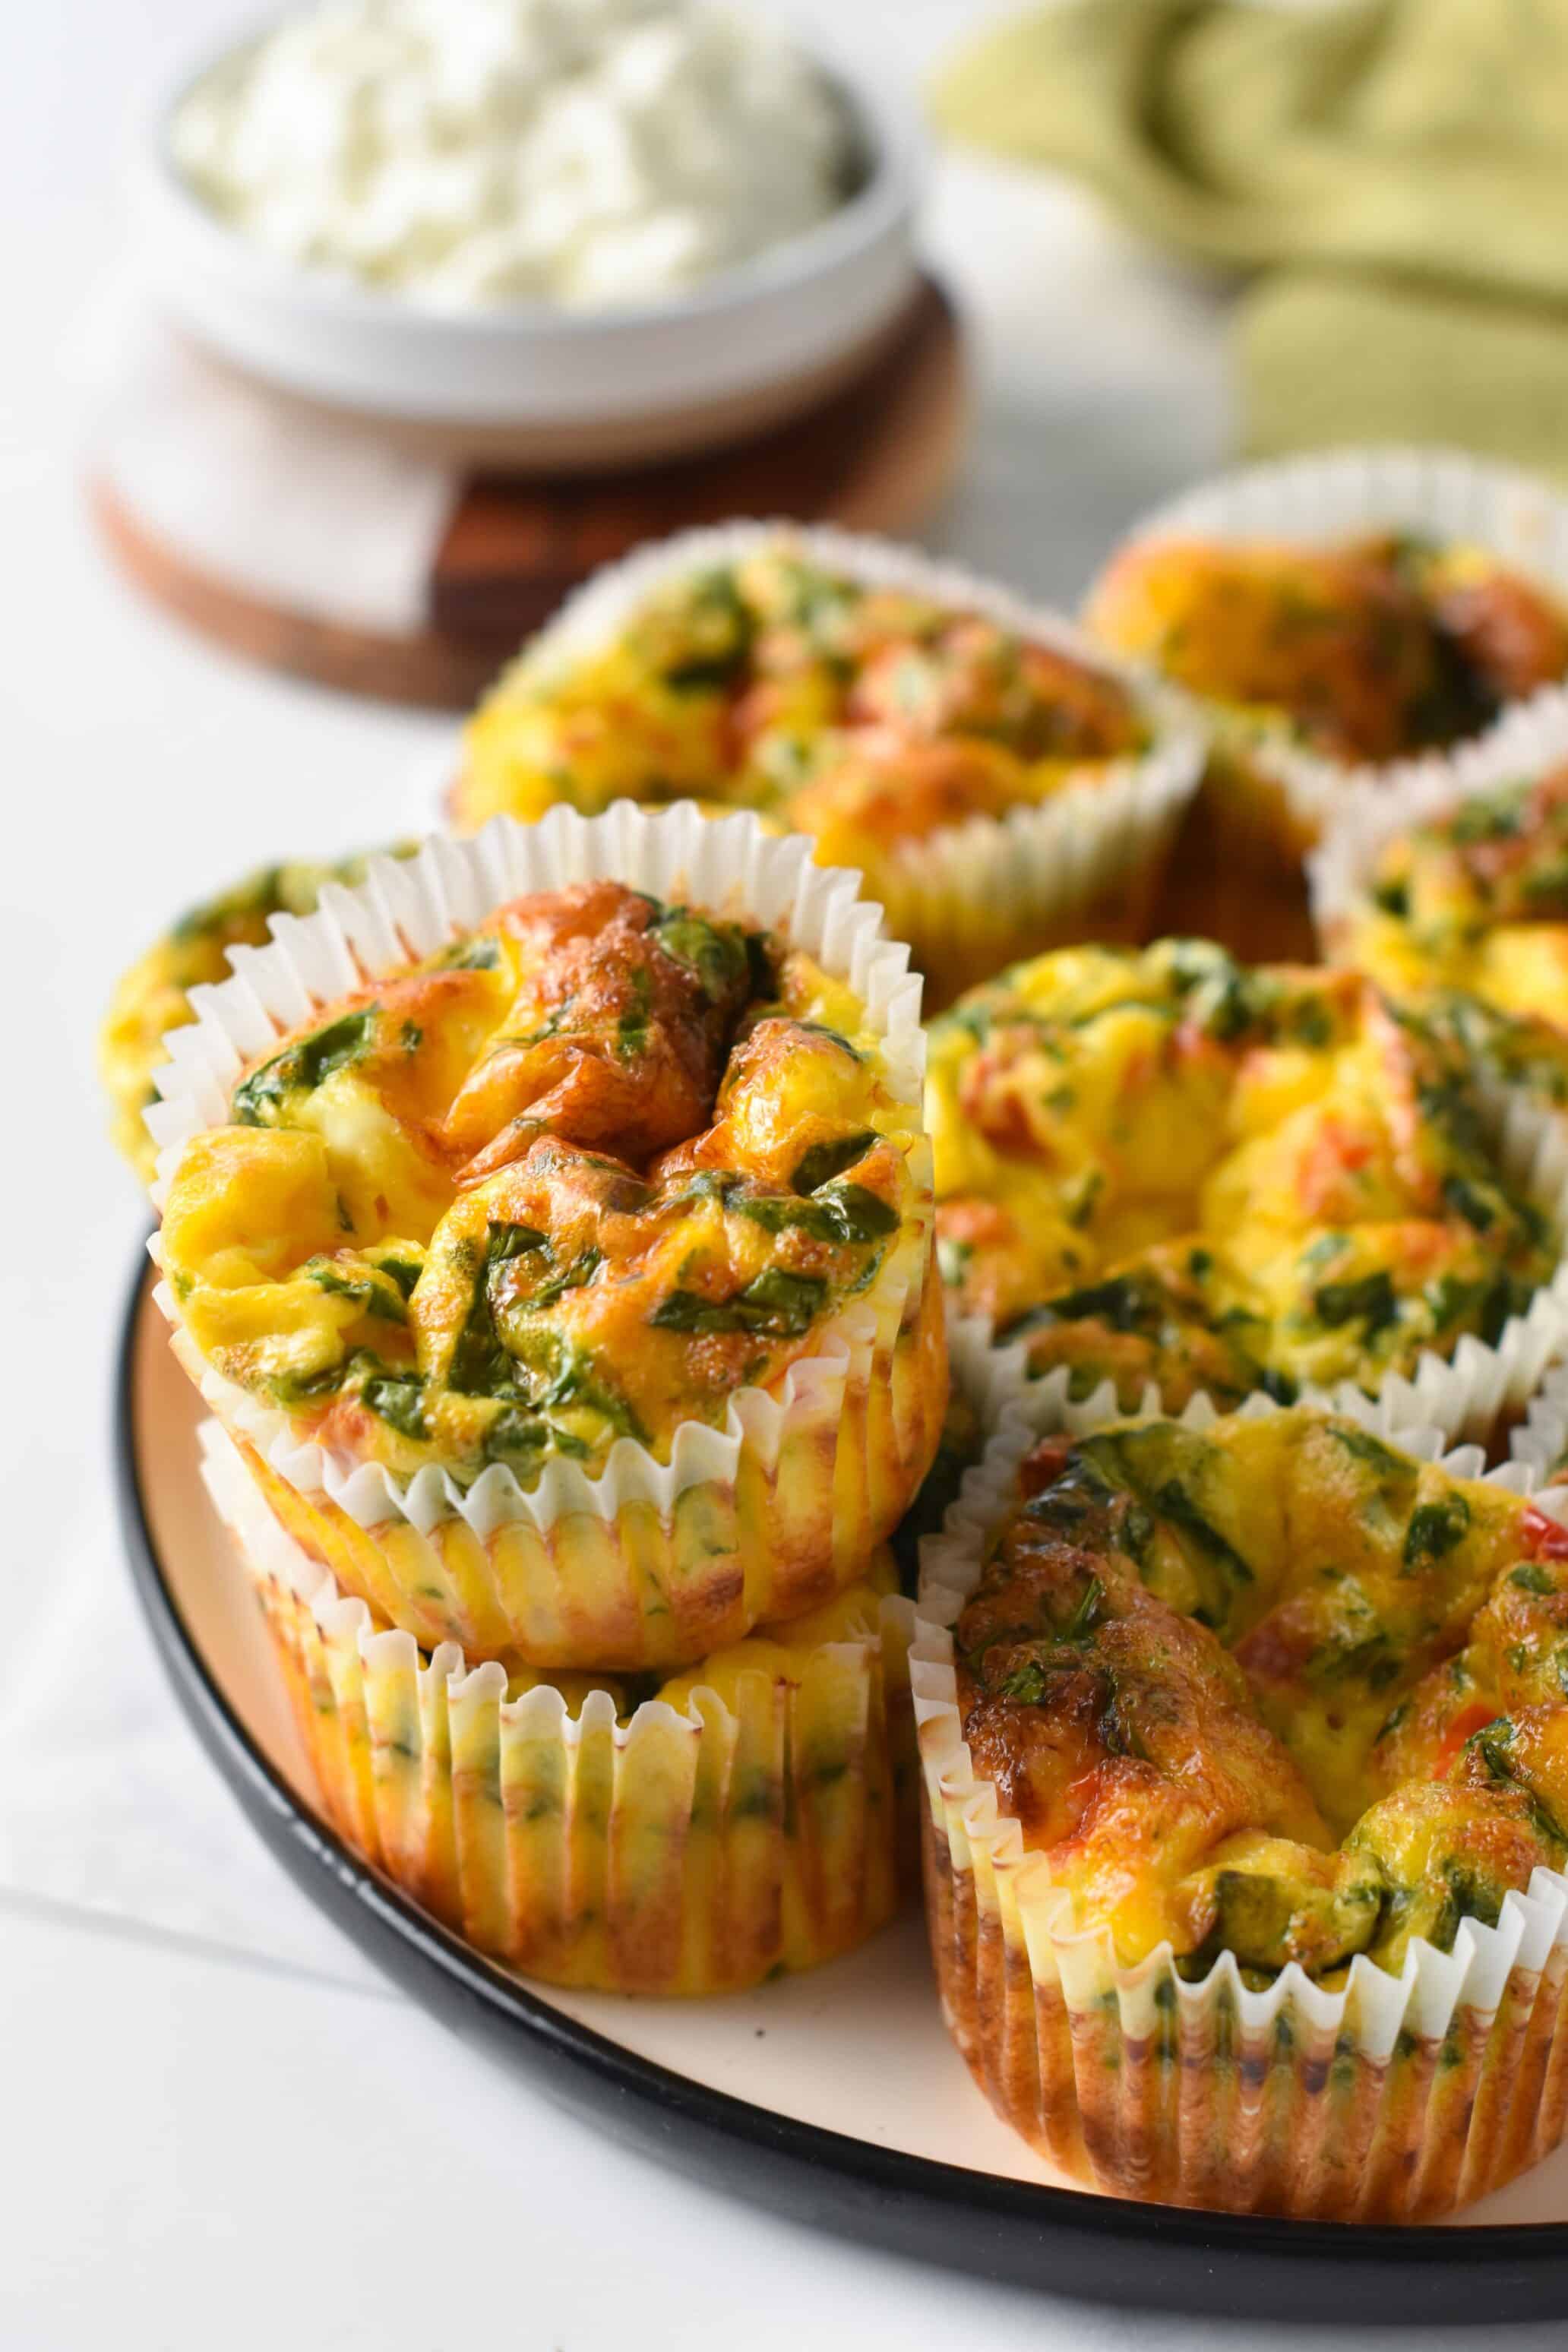 No Matter The Pan, You Need Muffin Liners When Baking Egg Bites